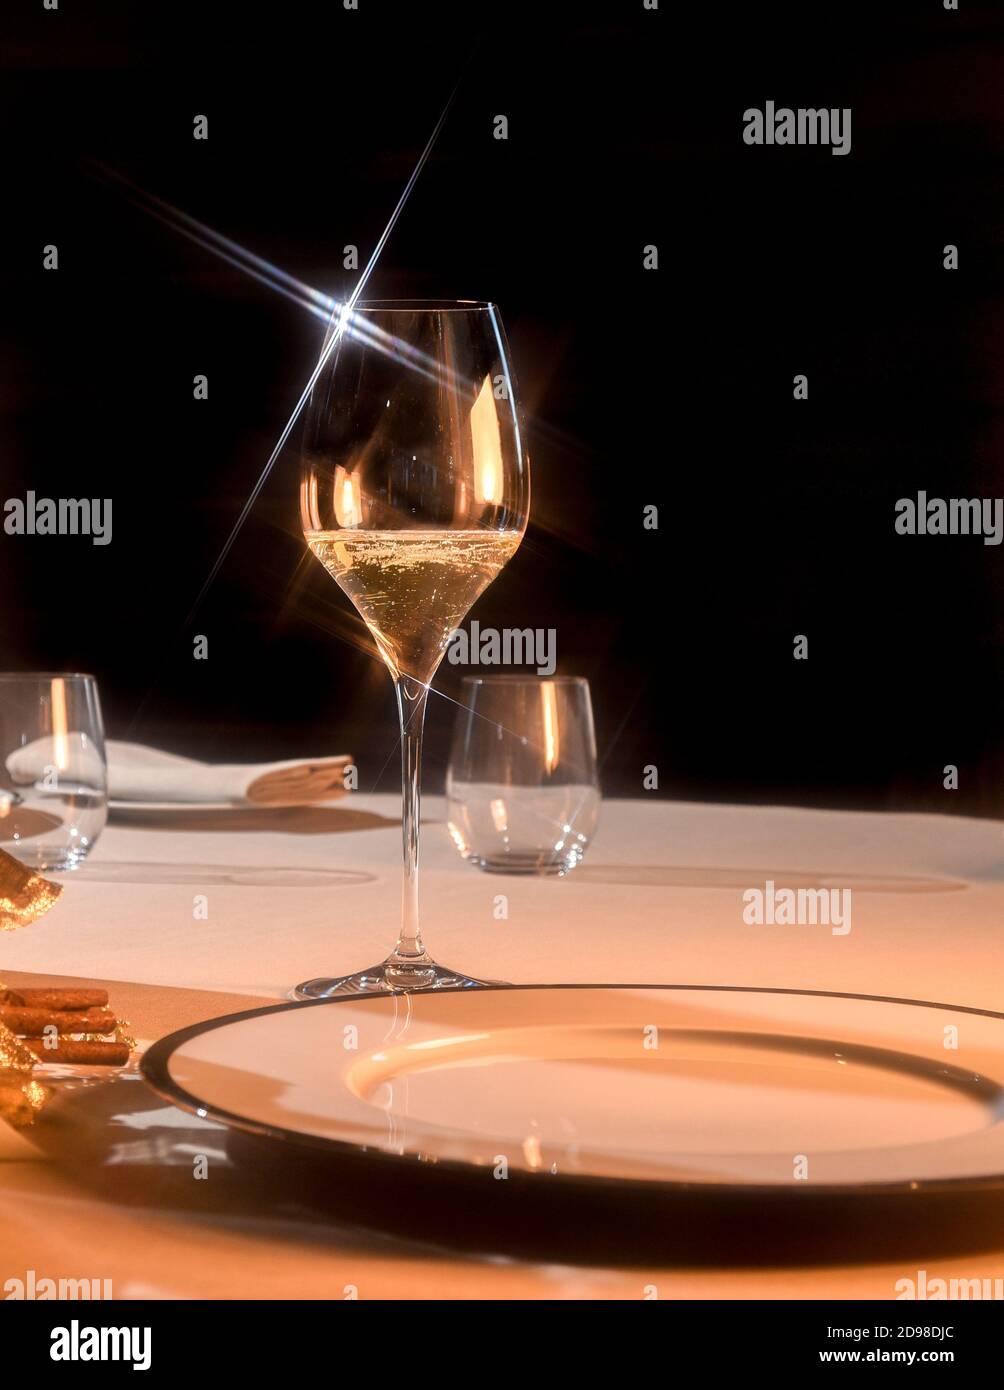 glass of champagne on table setting at restaurant, star light reflections on black background Stock Photo